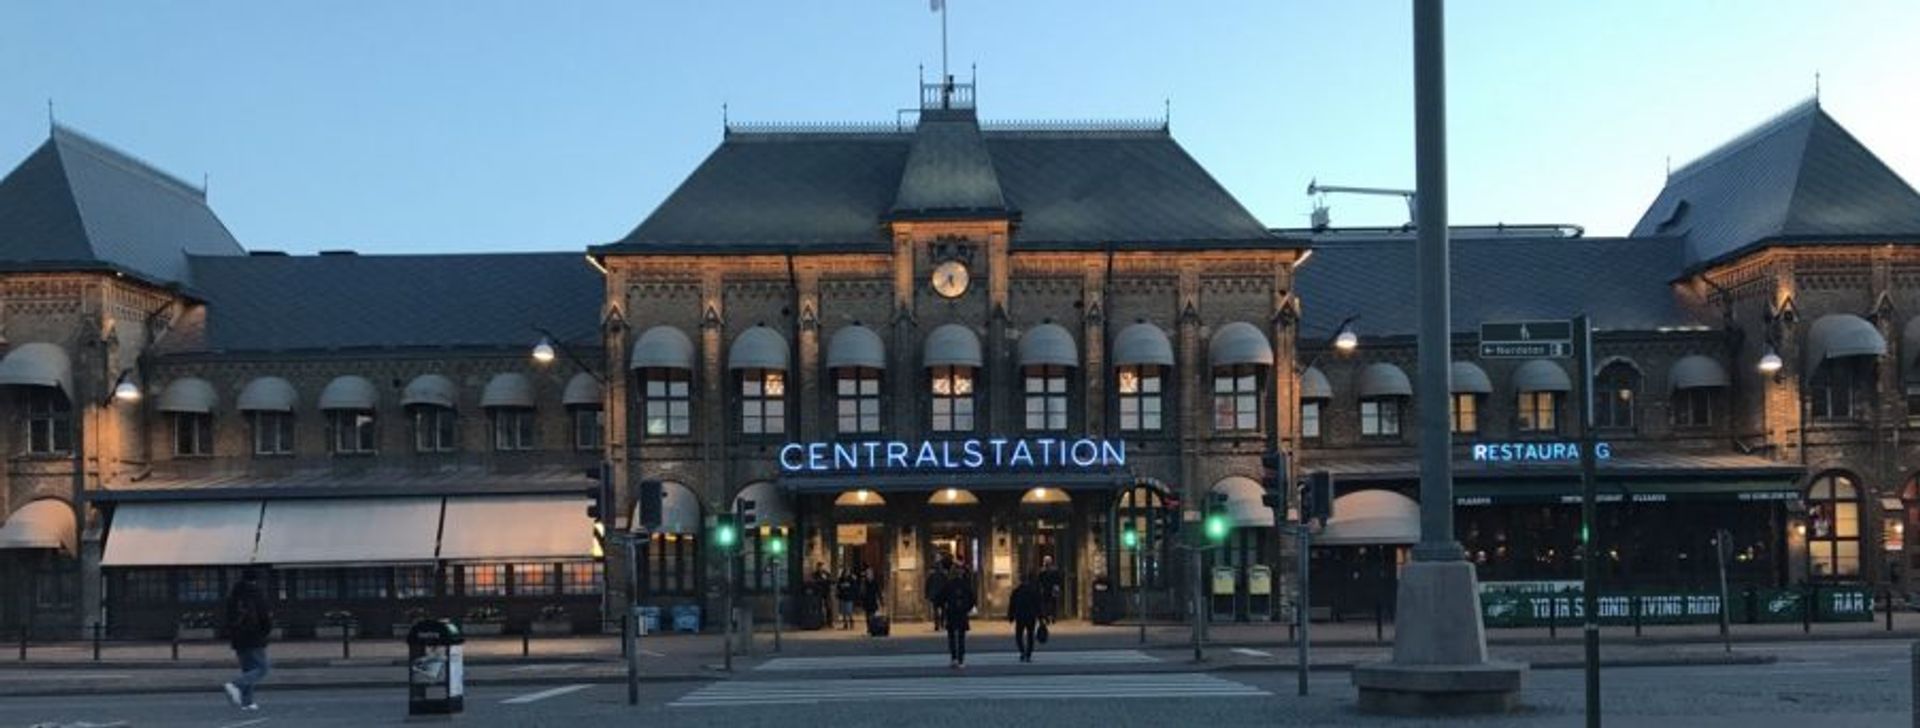 A Love letter to Gothenburg